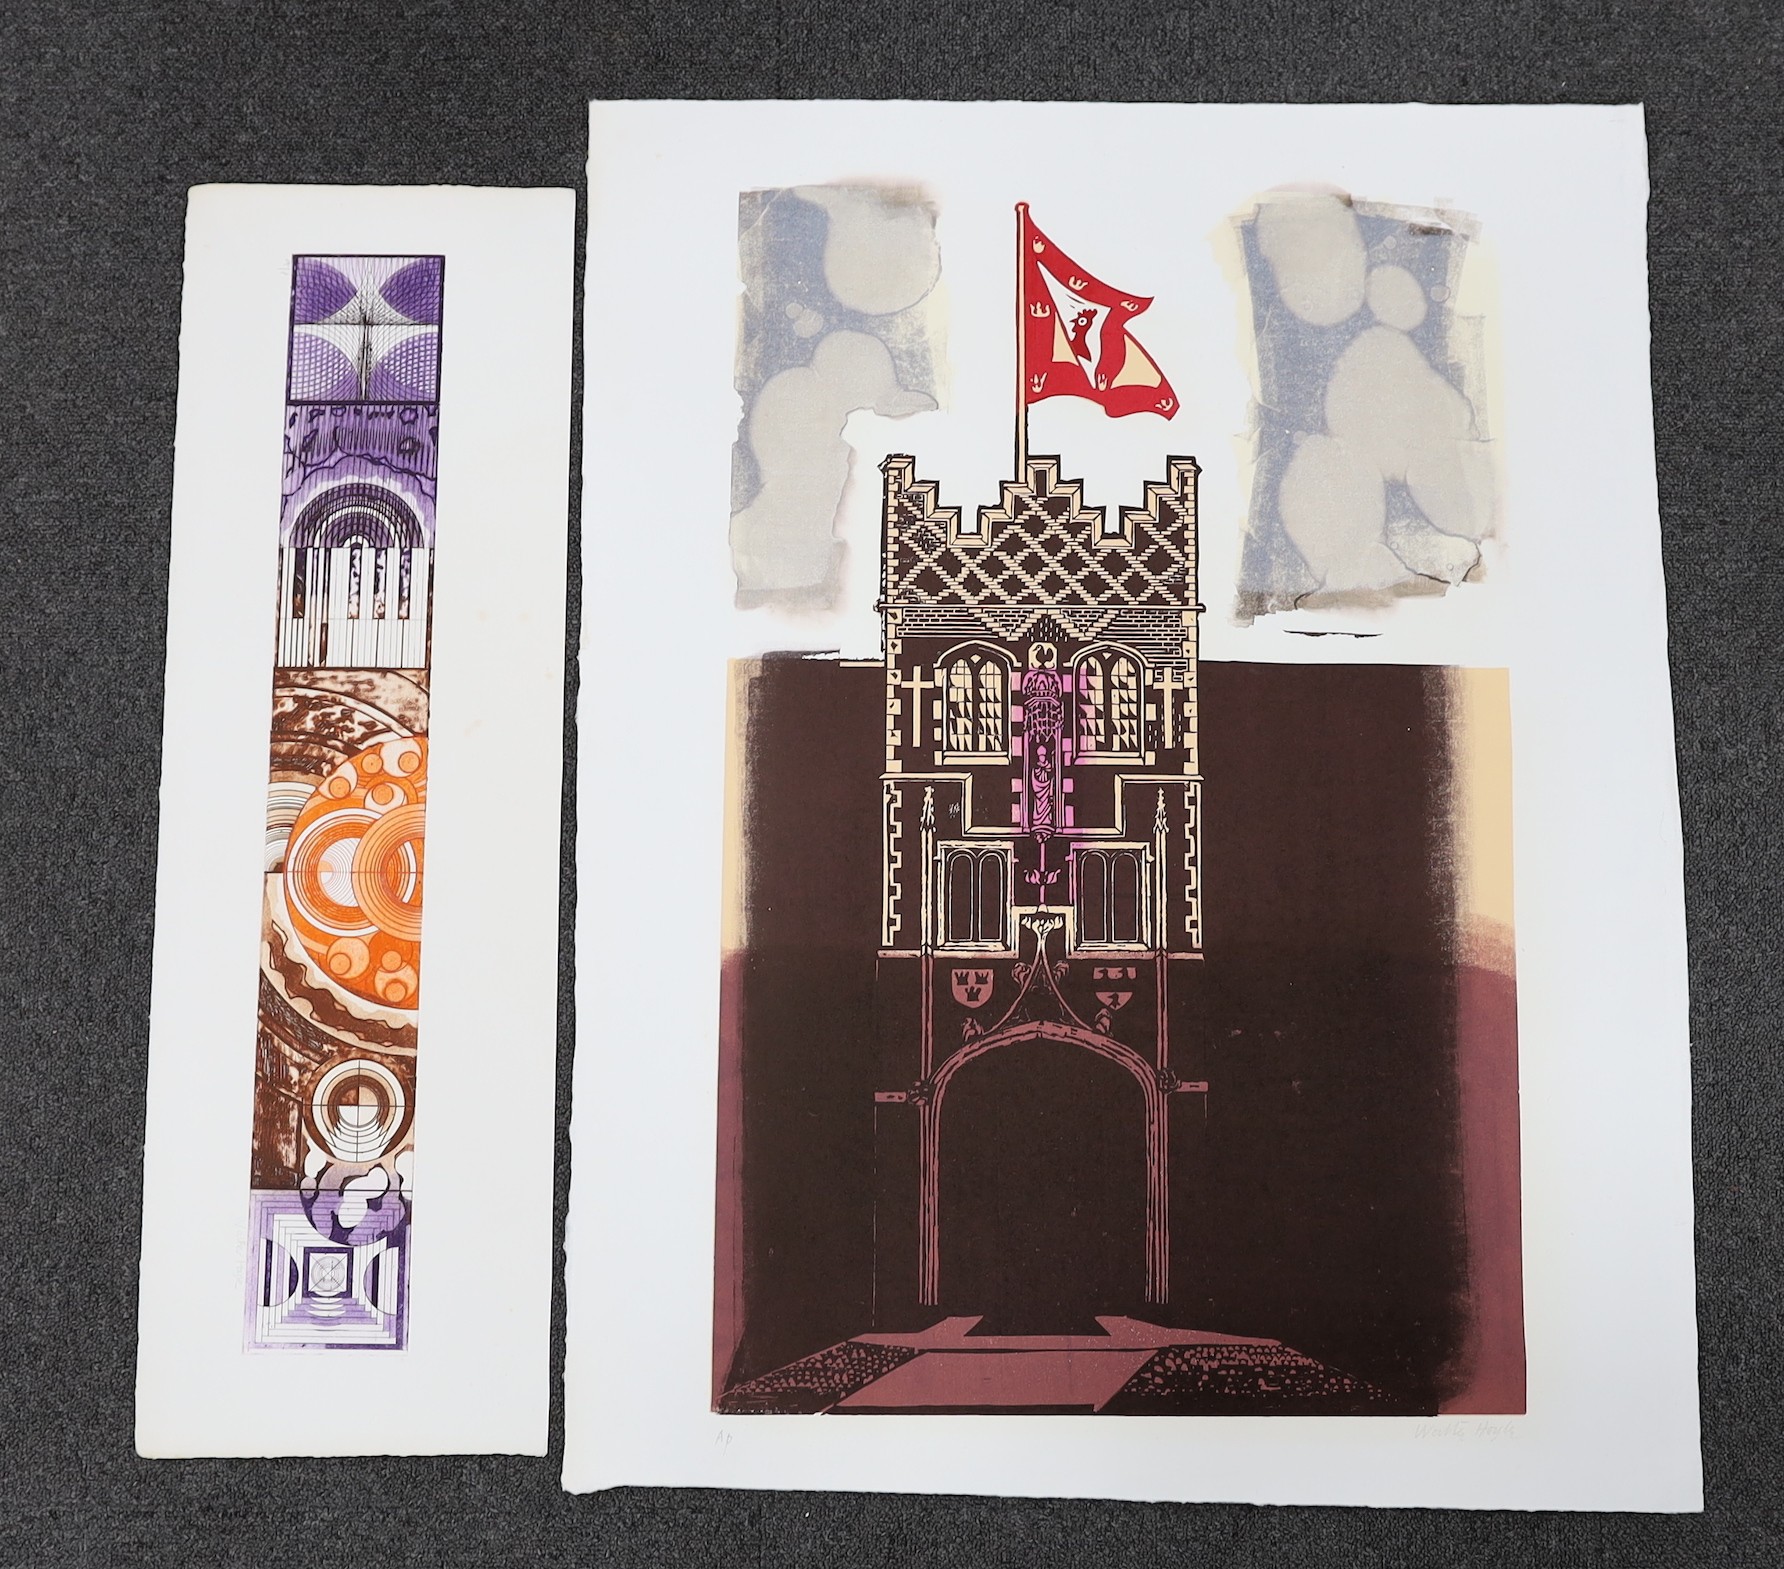 Walter Hoyle (1922-2009), two linocuts, Jesus College, Cambridge and Abstract designs, both signed